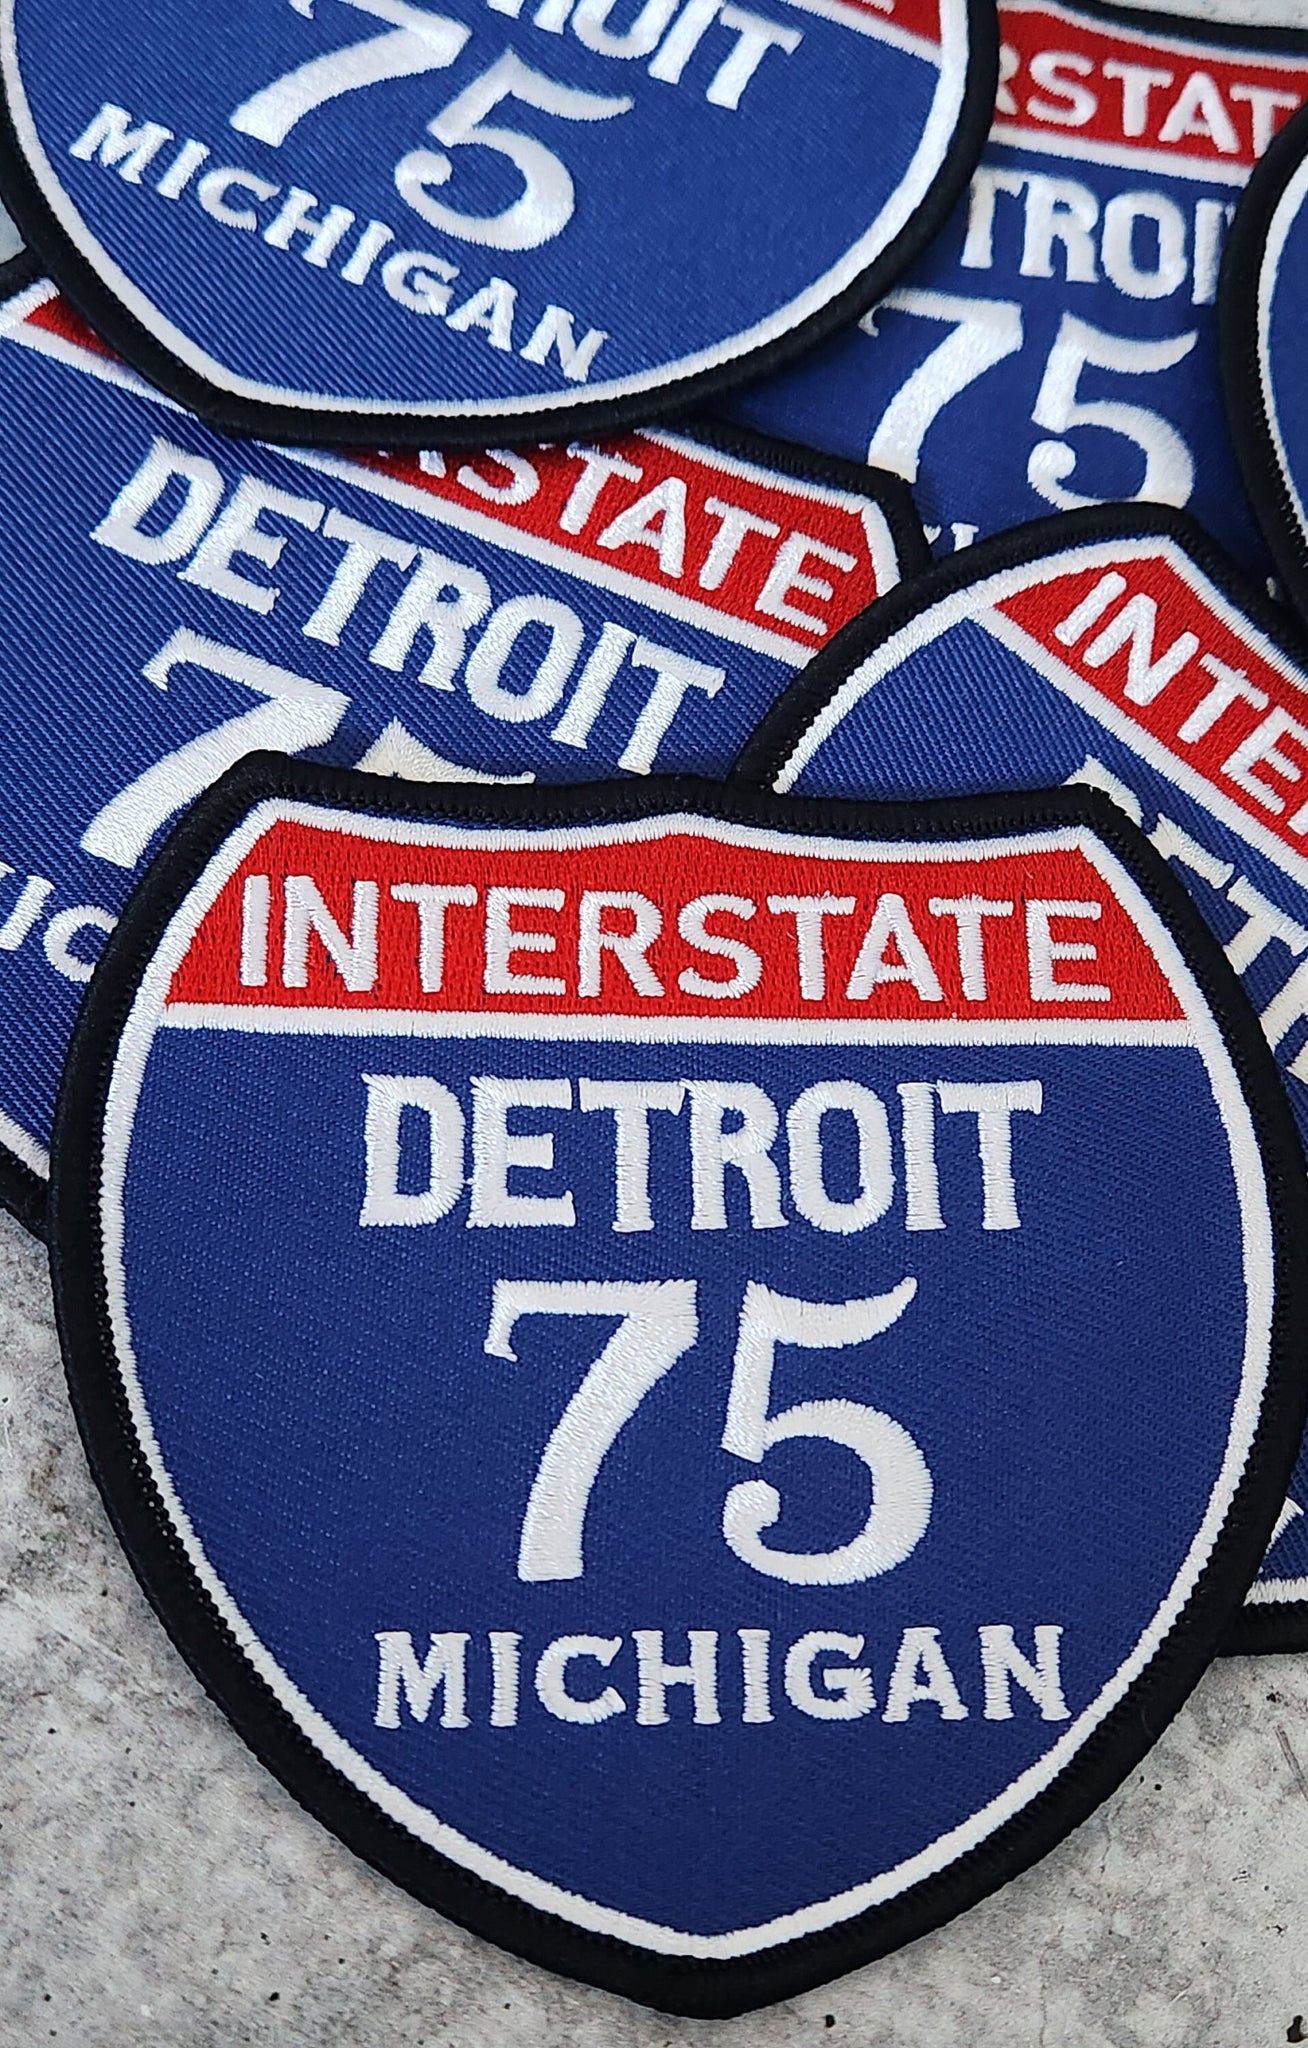 Collectable 1-pc, "DETROIT 4" Interstate 75"  Iron-On Embroidered Patch; Popular Michigan Emblem, Red/White/Blue Badge, Patch for Jackets